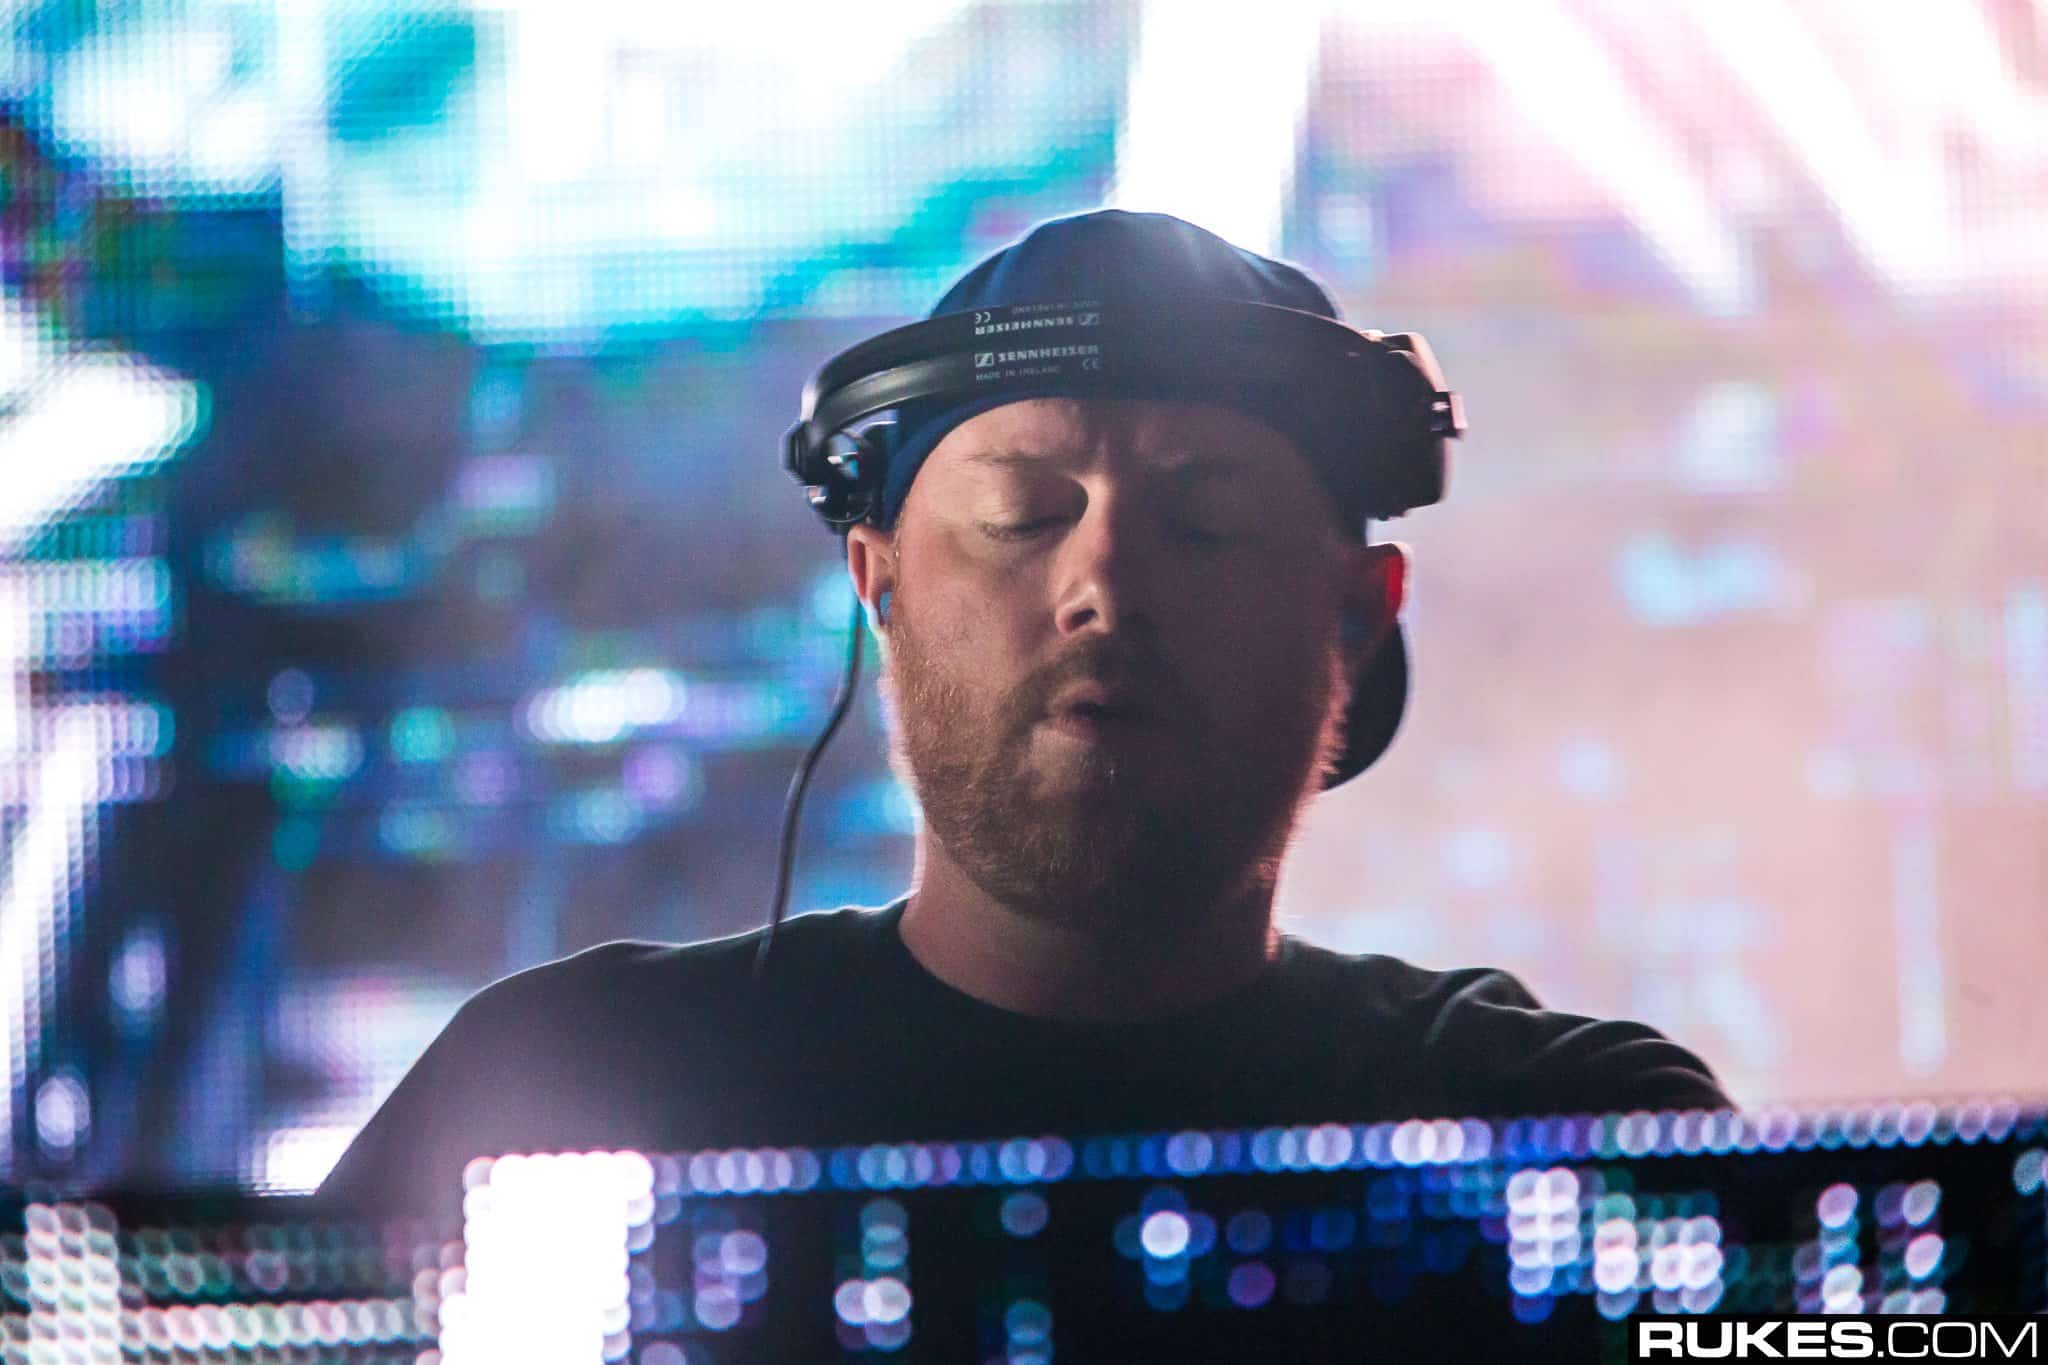 Eric Prydz ‘Opus’ is still on Beatport top 100 progressive house chart, 7 years after its release